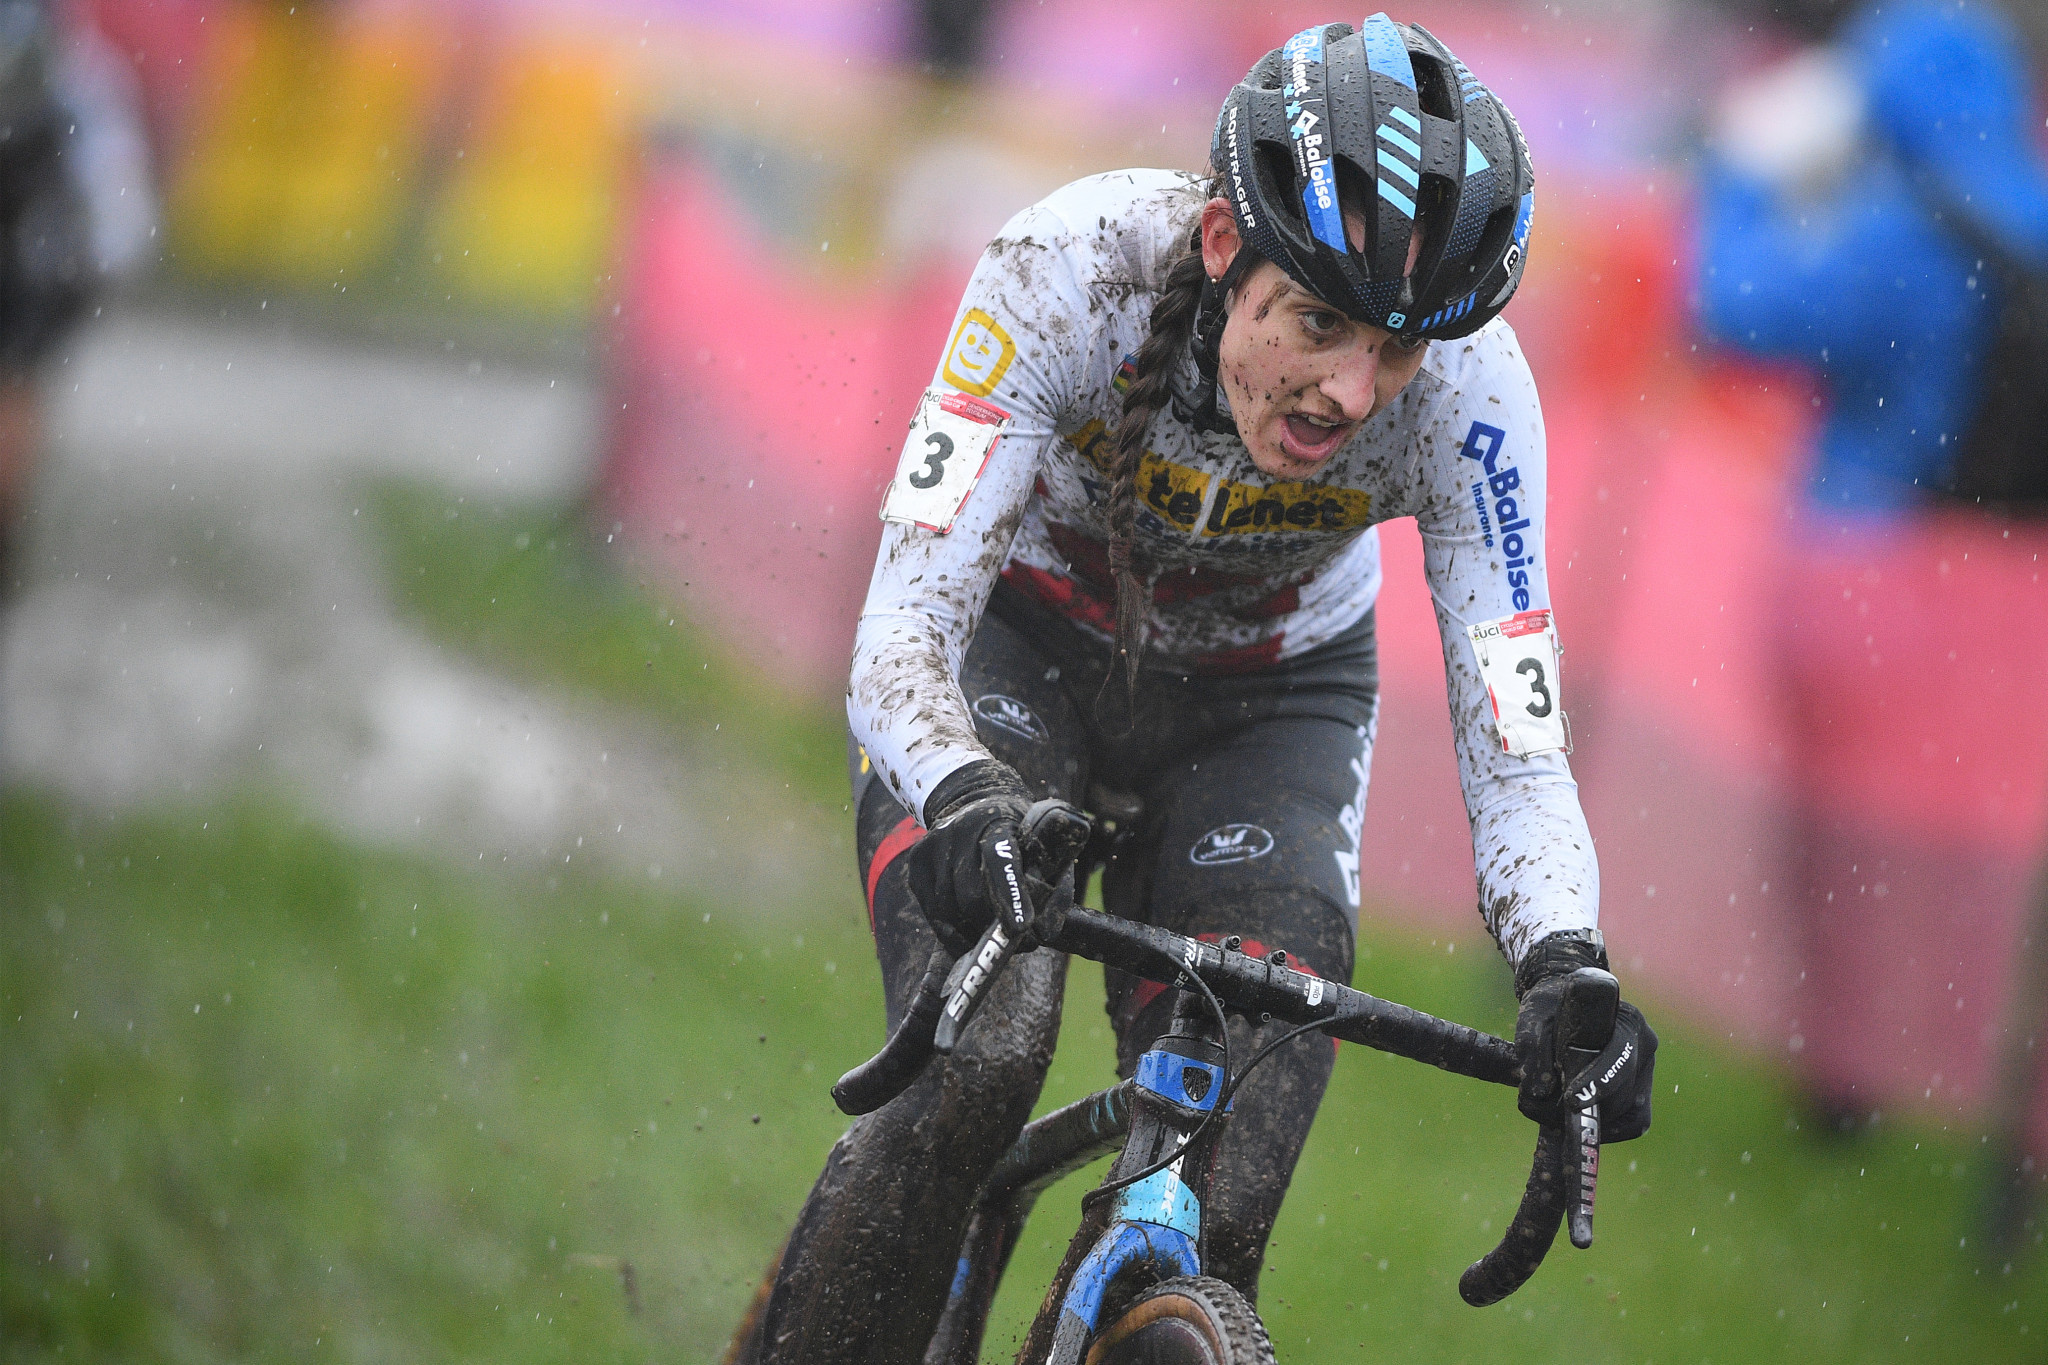 Lucinda Brand could secure the overall women's Cyclo-Cross World Cup title in Hulst ©Getty Images